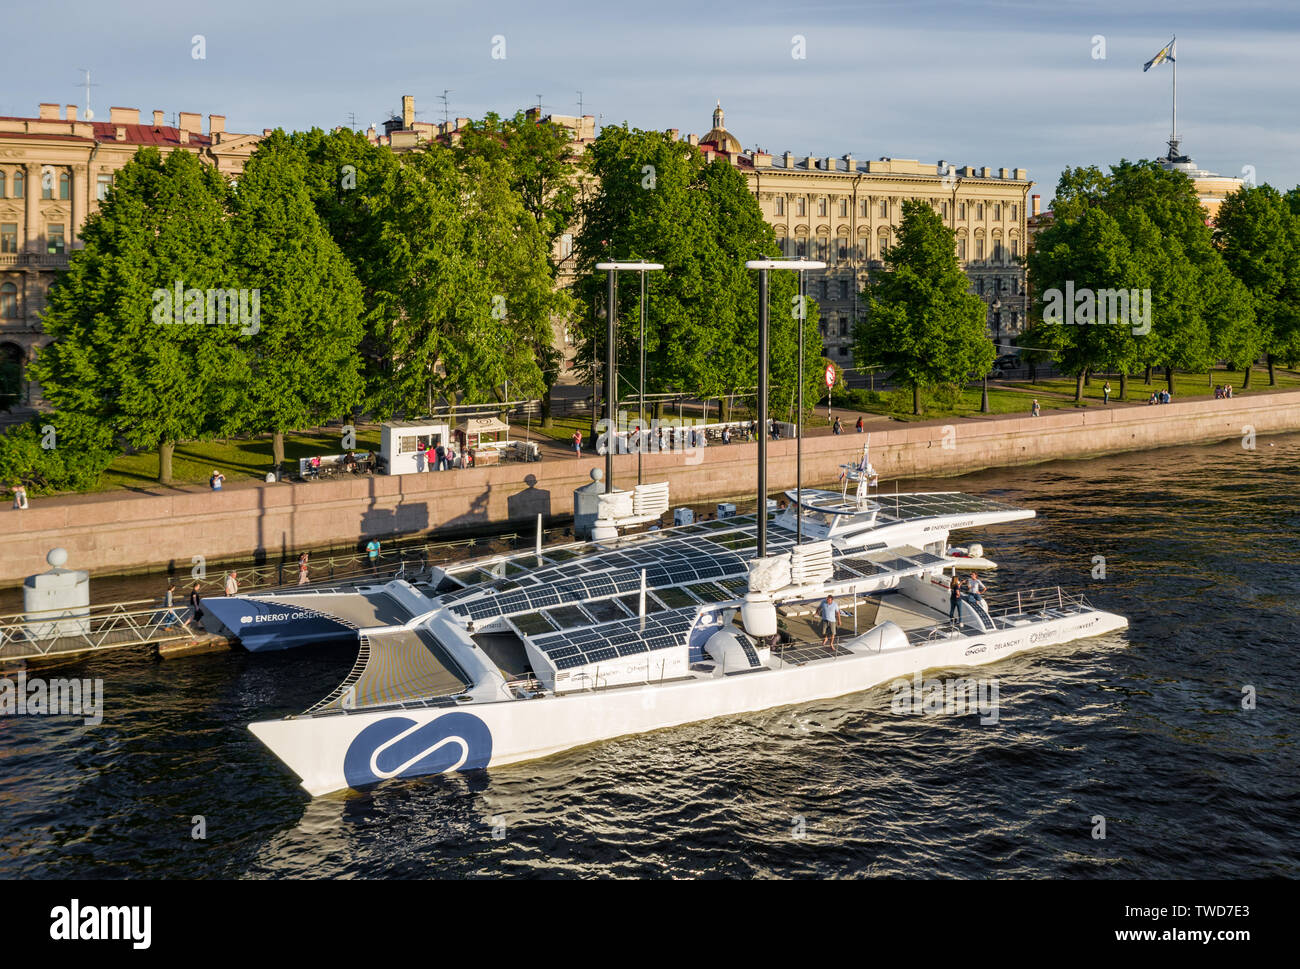 The French Catamaran Energy Observer against sights of the city, working for pure and renewables source of energy, solar energy, wind power, Admiralty Stock Photo